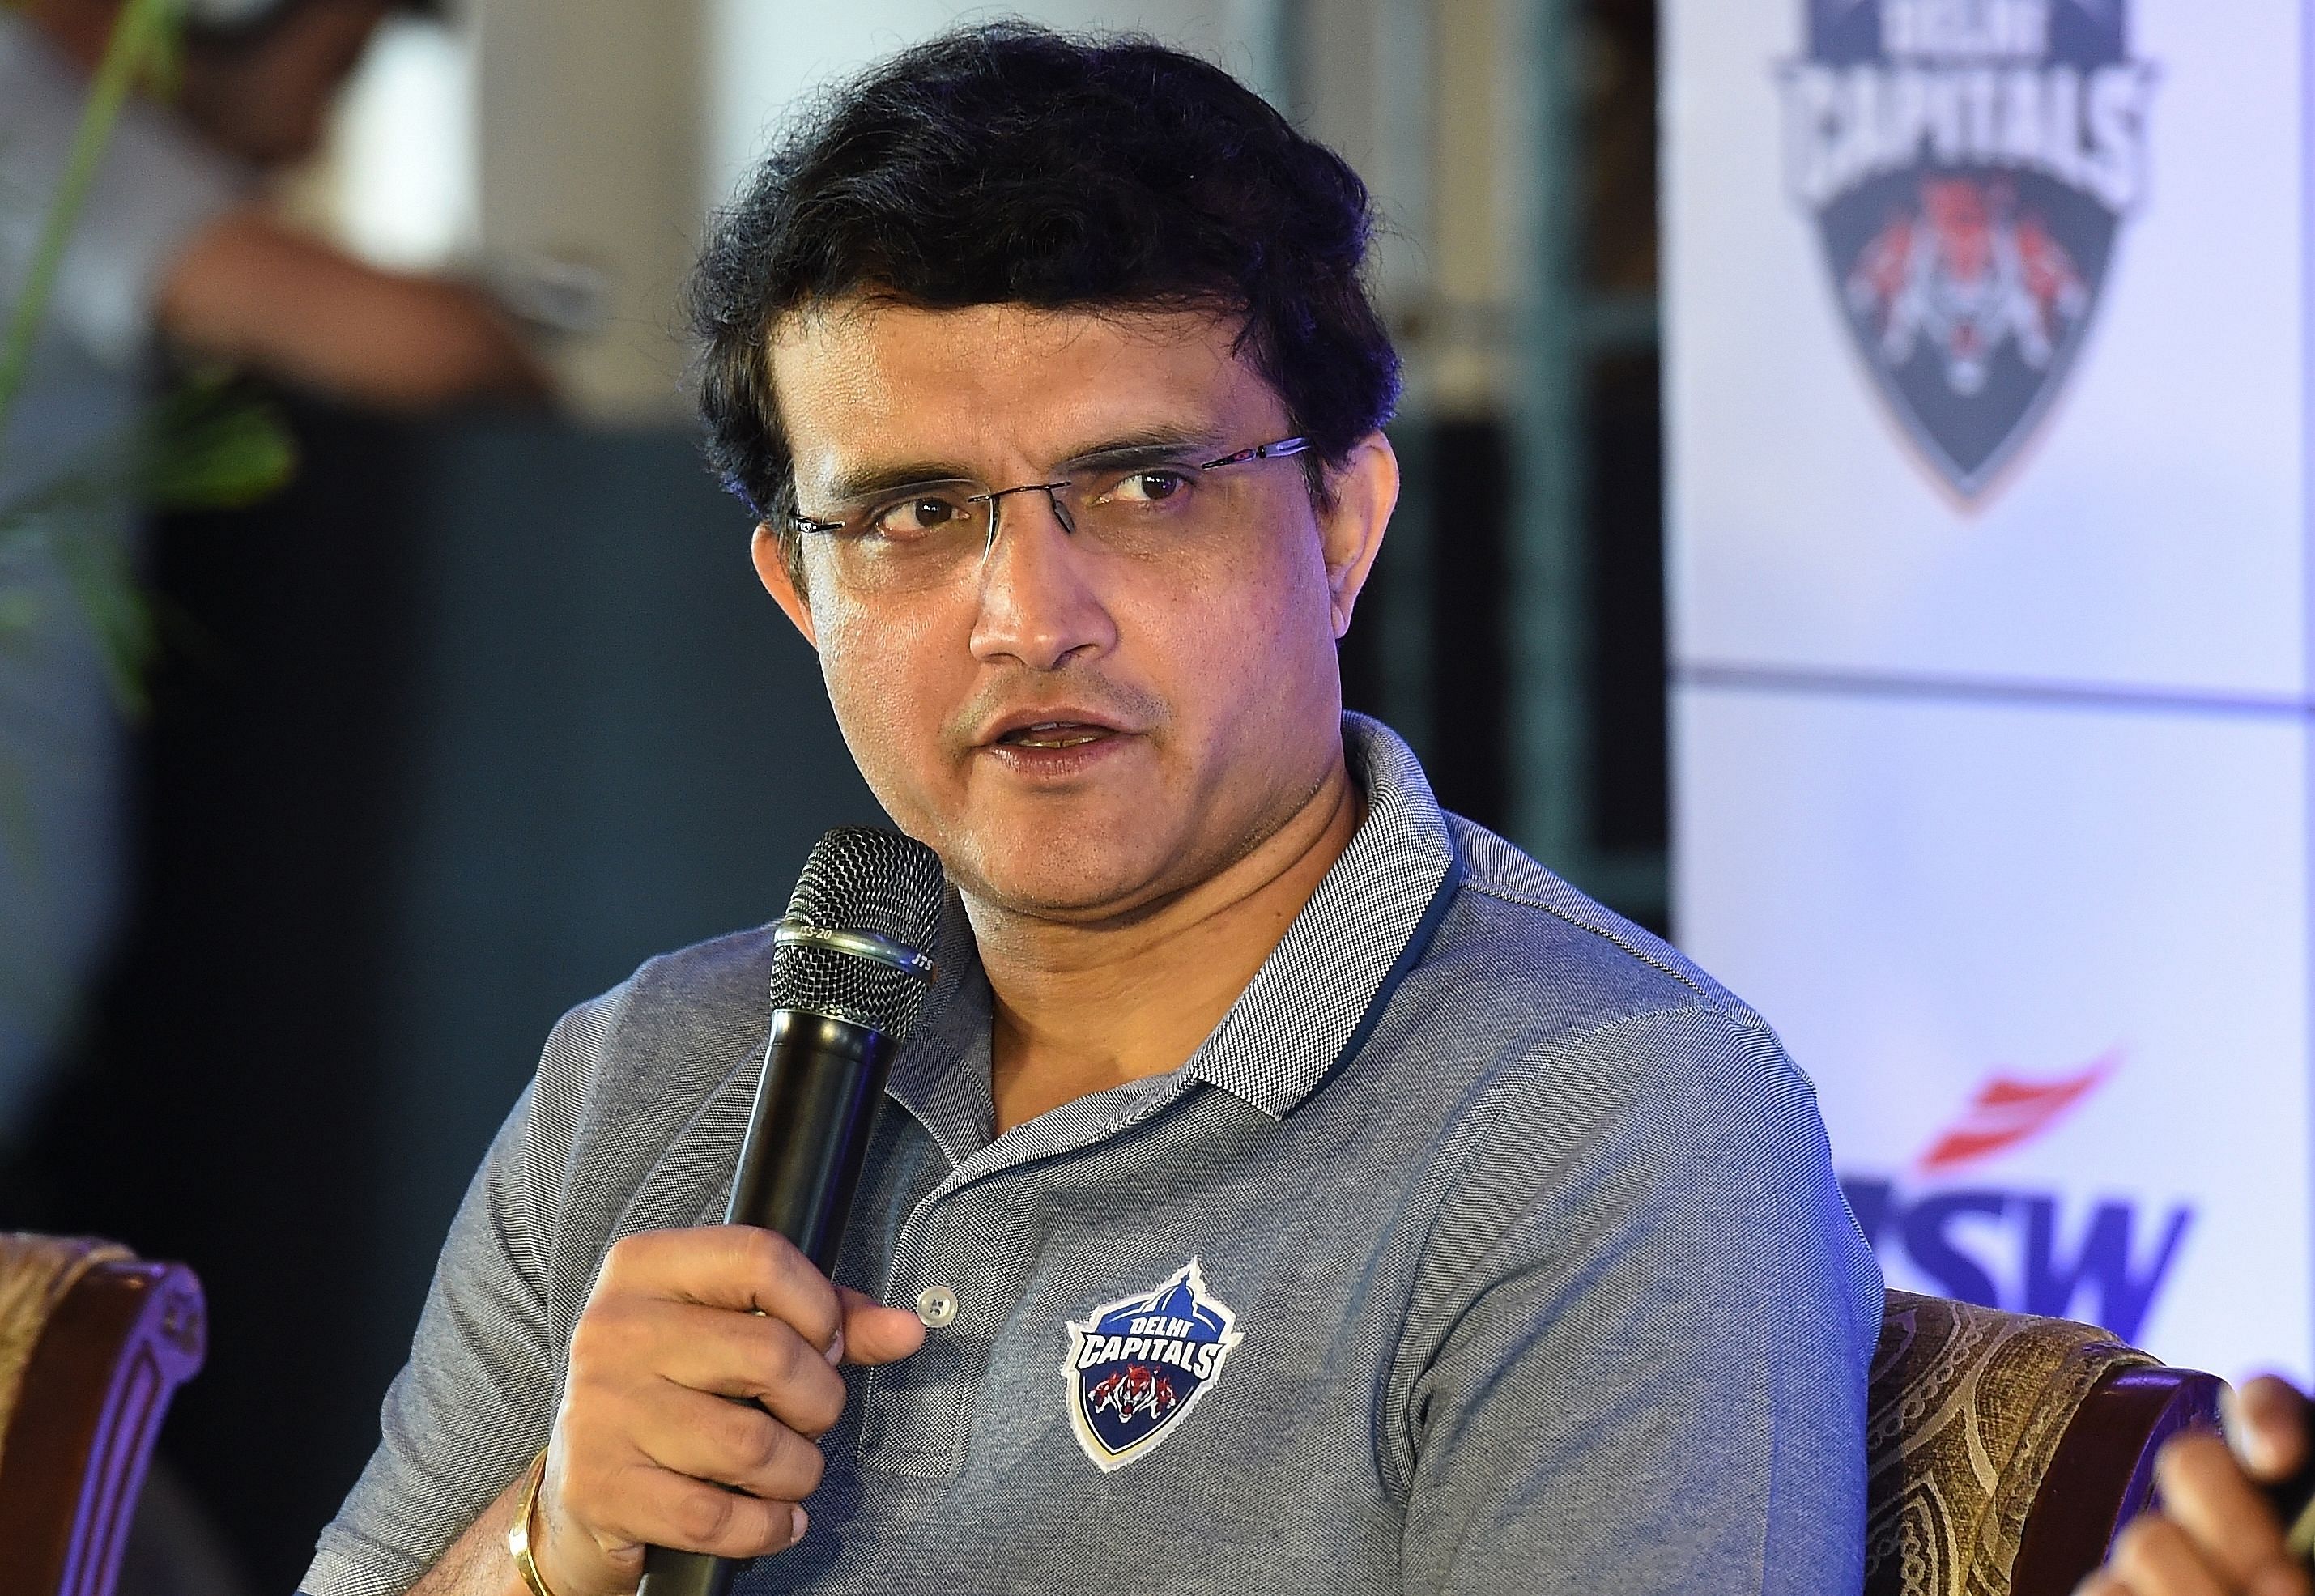 Former cricketer Sourav Ganguly, president of the Board of Control for Cricket in India (BCCI). Credit: AFP File Photo